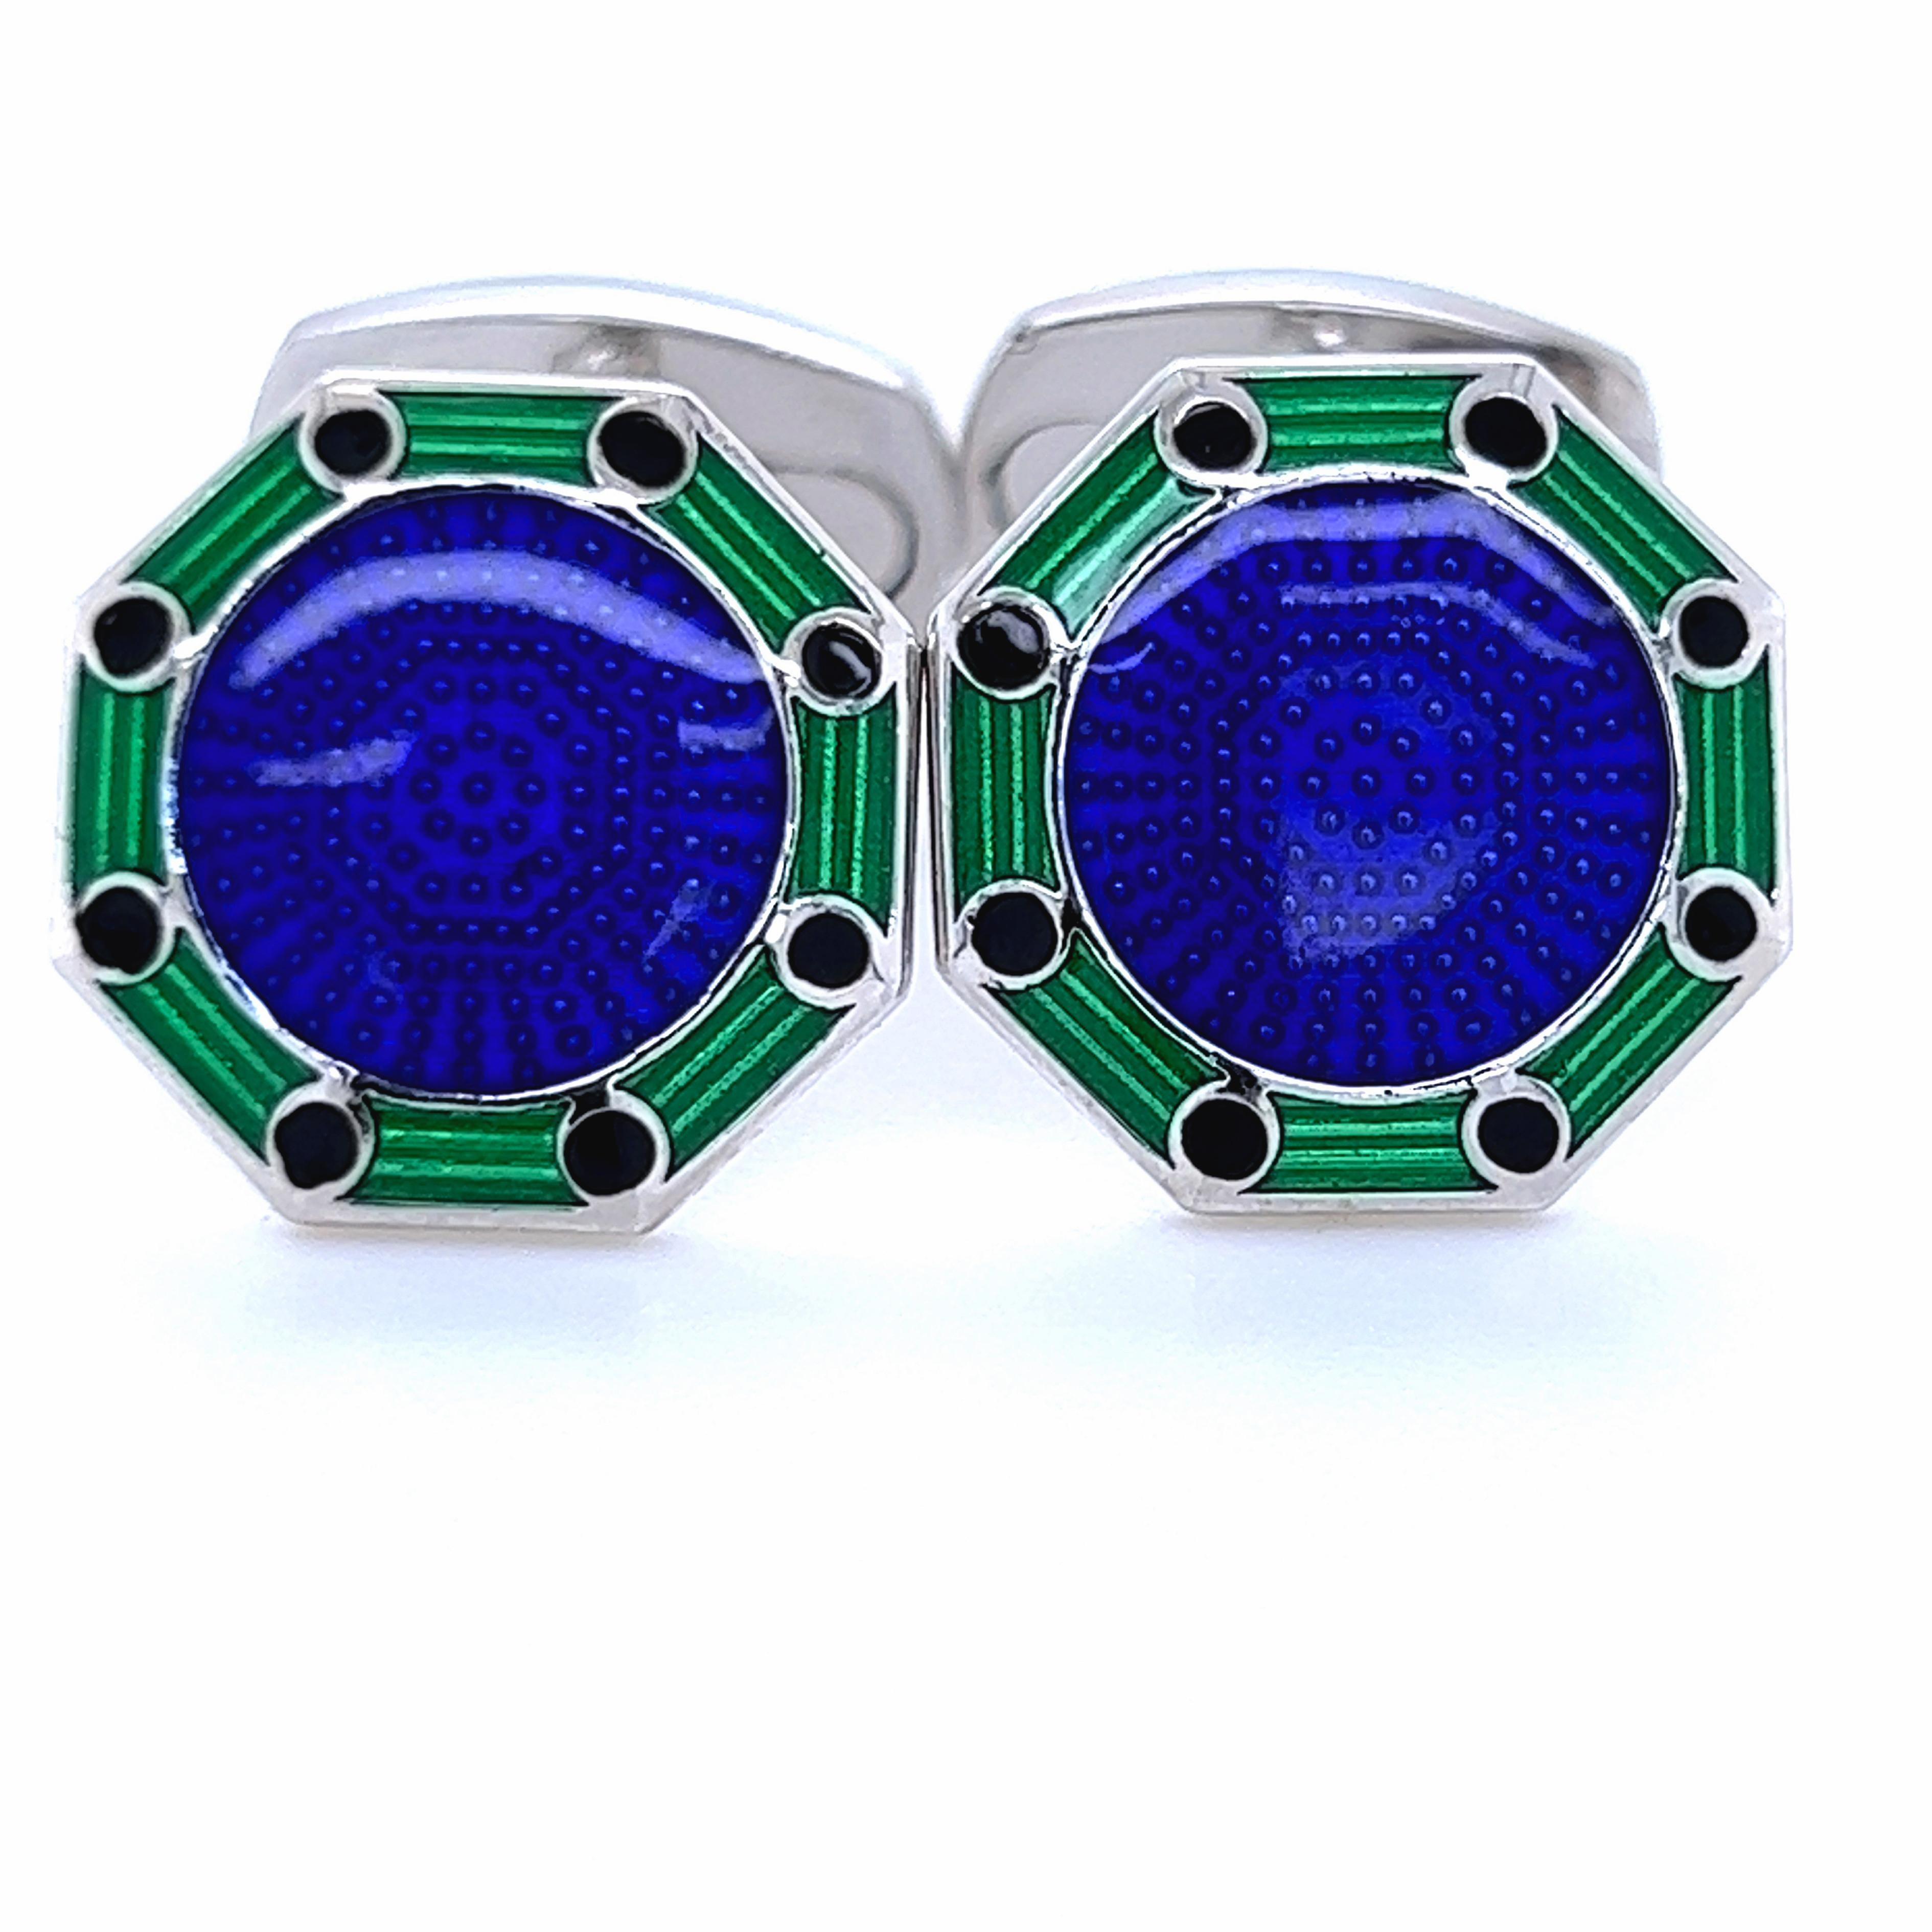 Contemporary Berca Octagonal Navy Blue Green Enameled Sterling Silver Cufflinks T-Bar Back For Sale